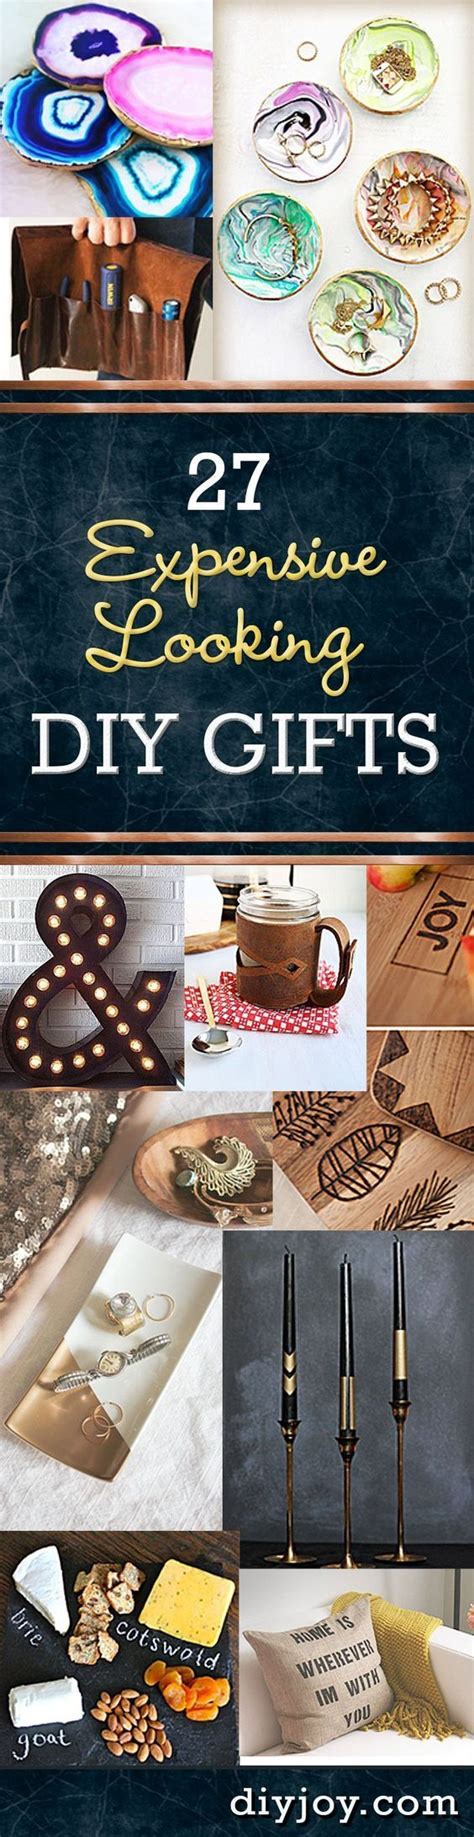 27 Expensive Looking Inexpensive Diy Ts Creative